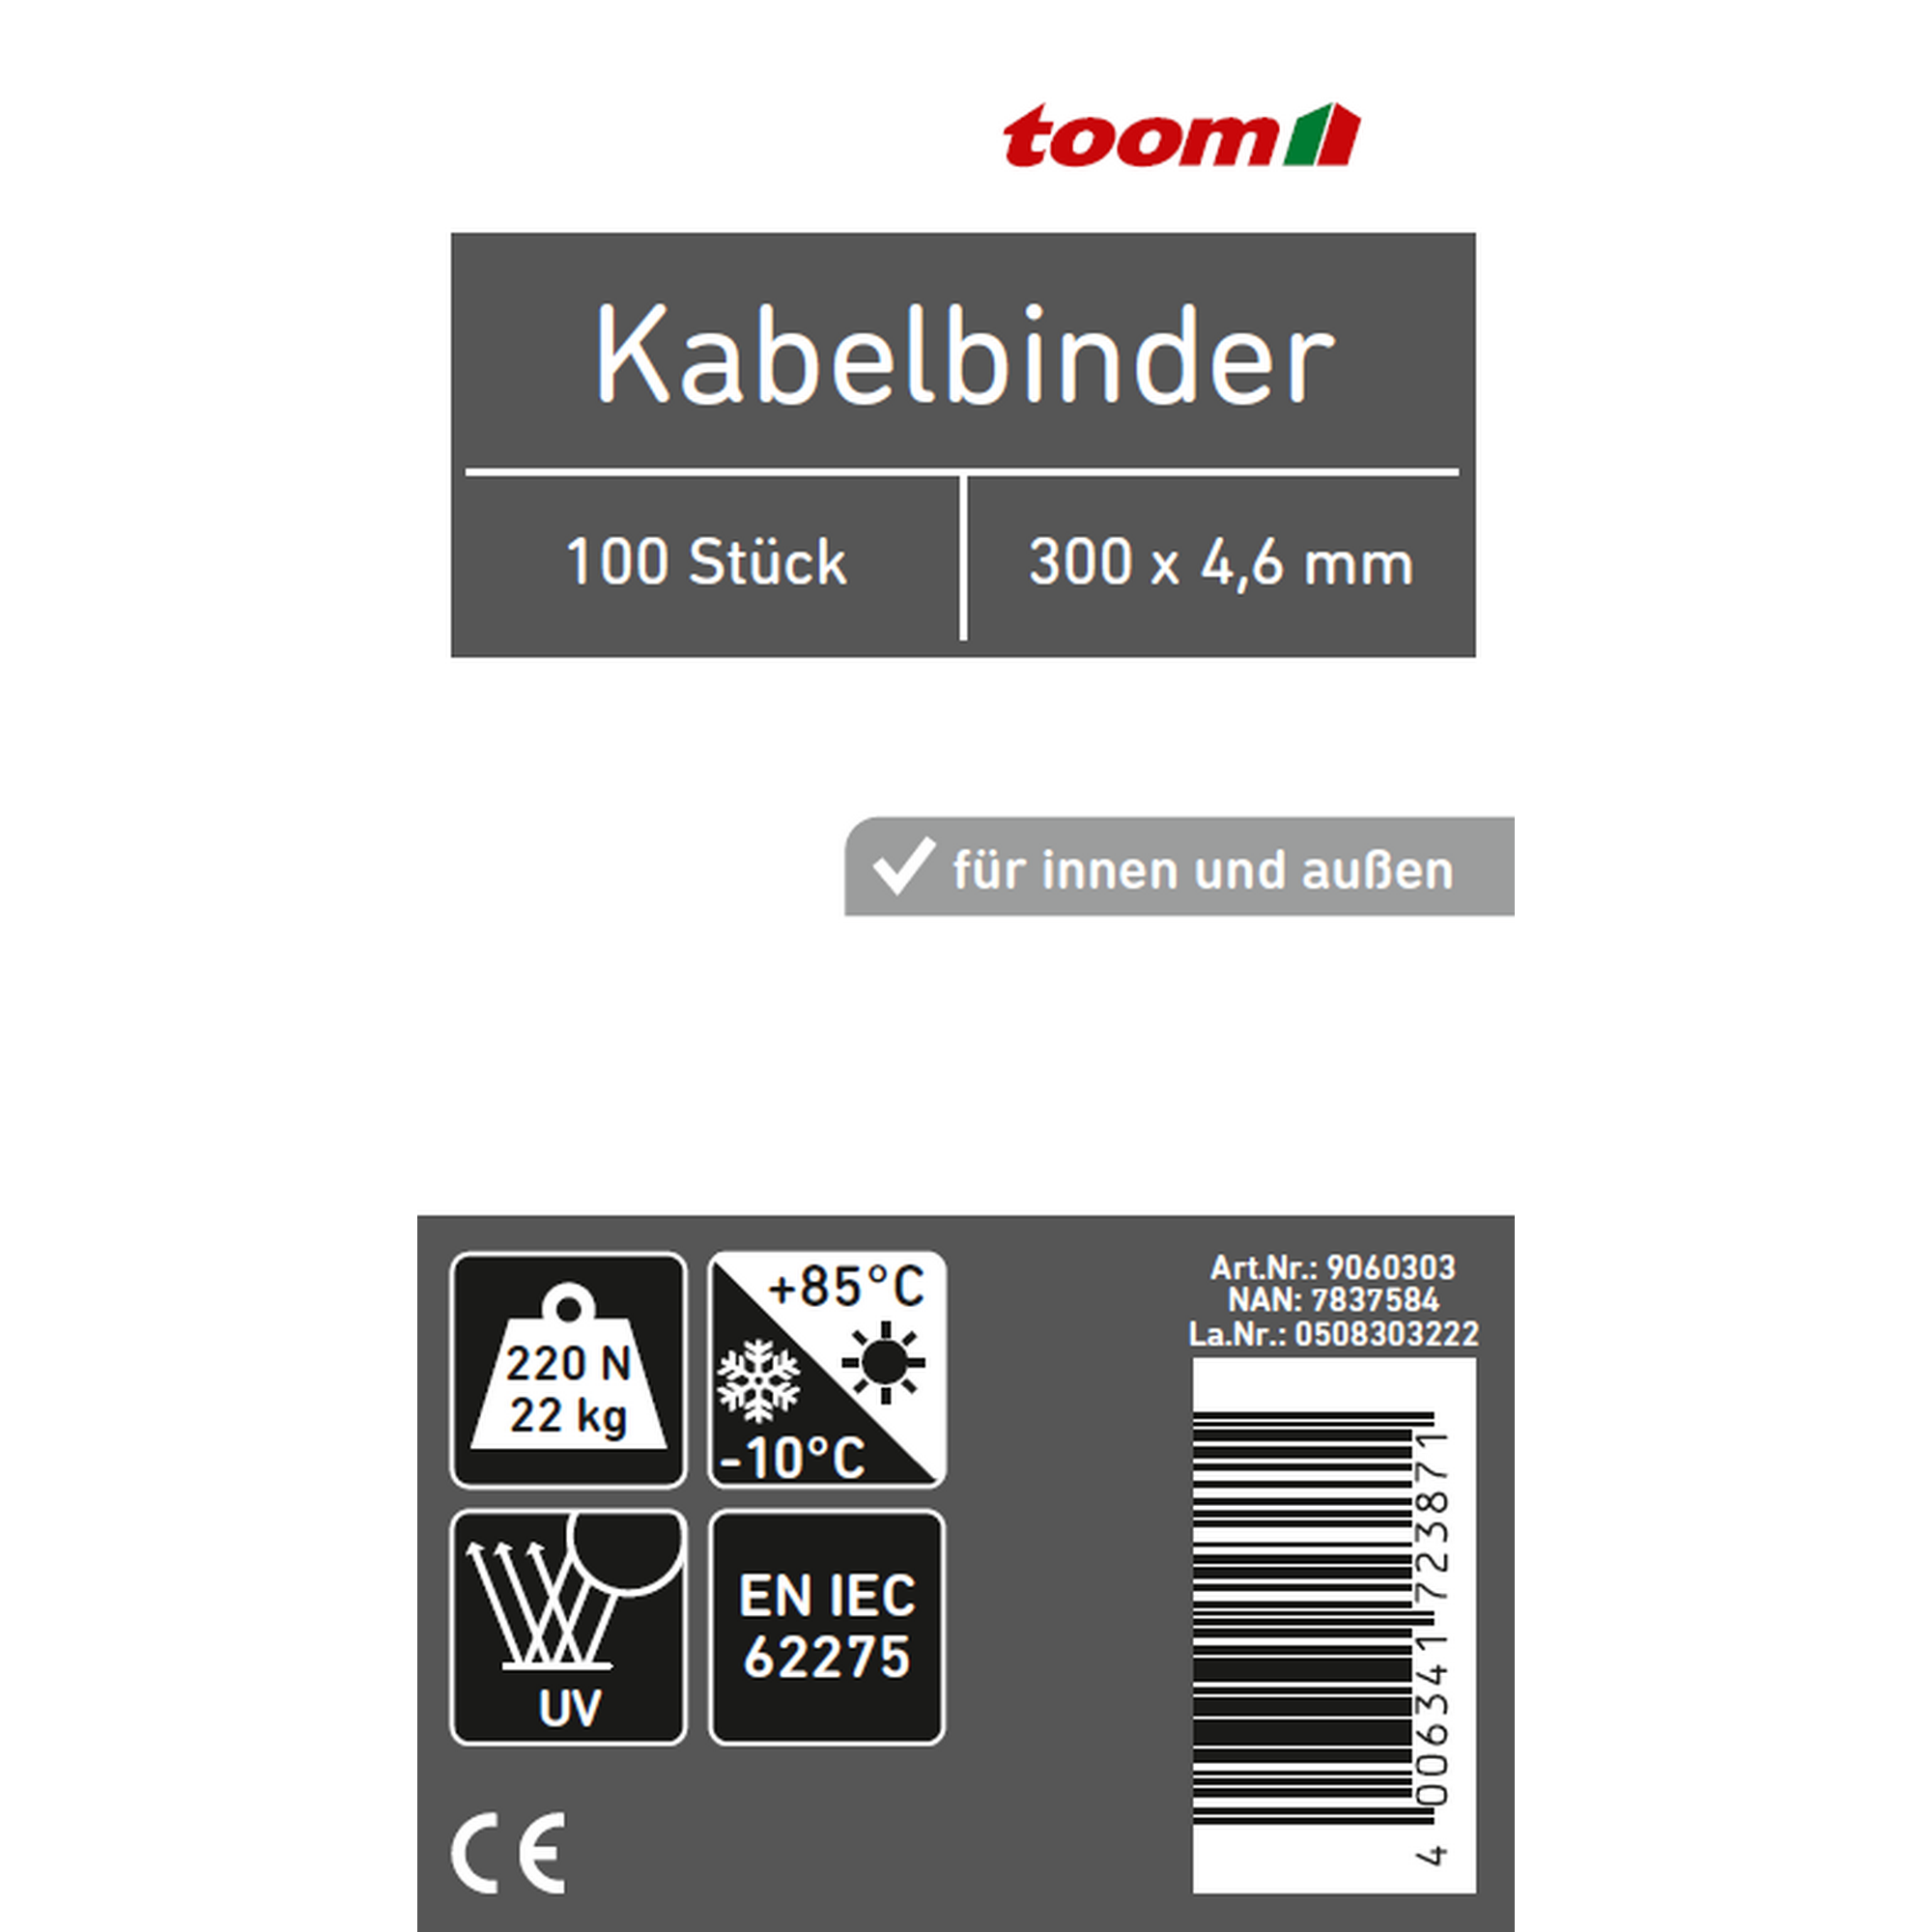 Kabelbinder bunt 4,6 x 300 mm 100 Stück + product picture